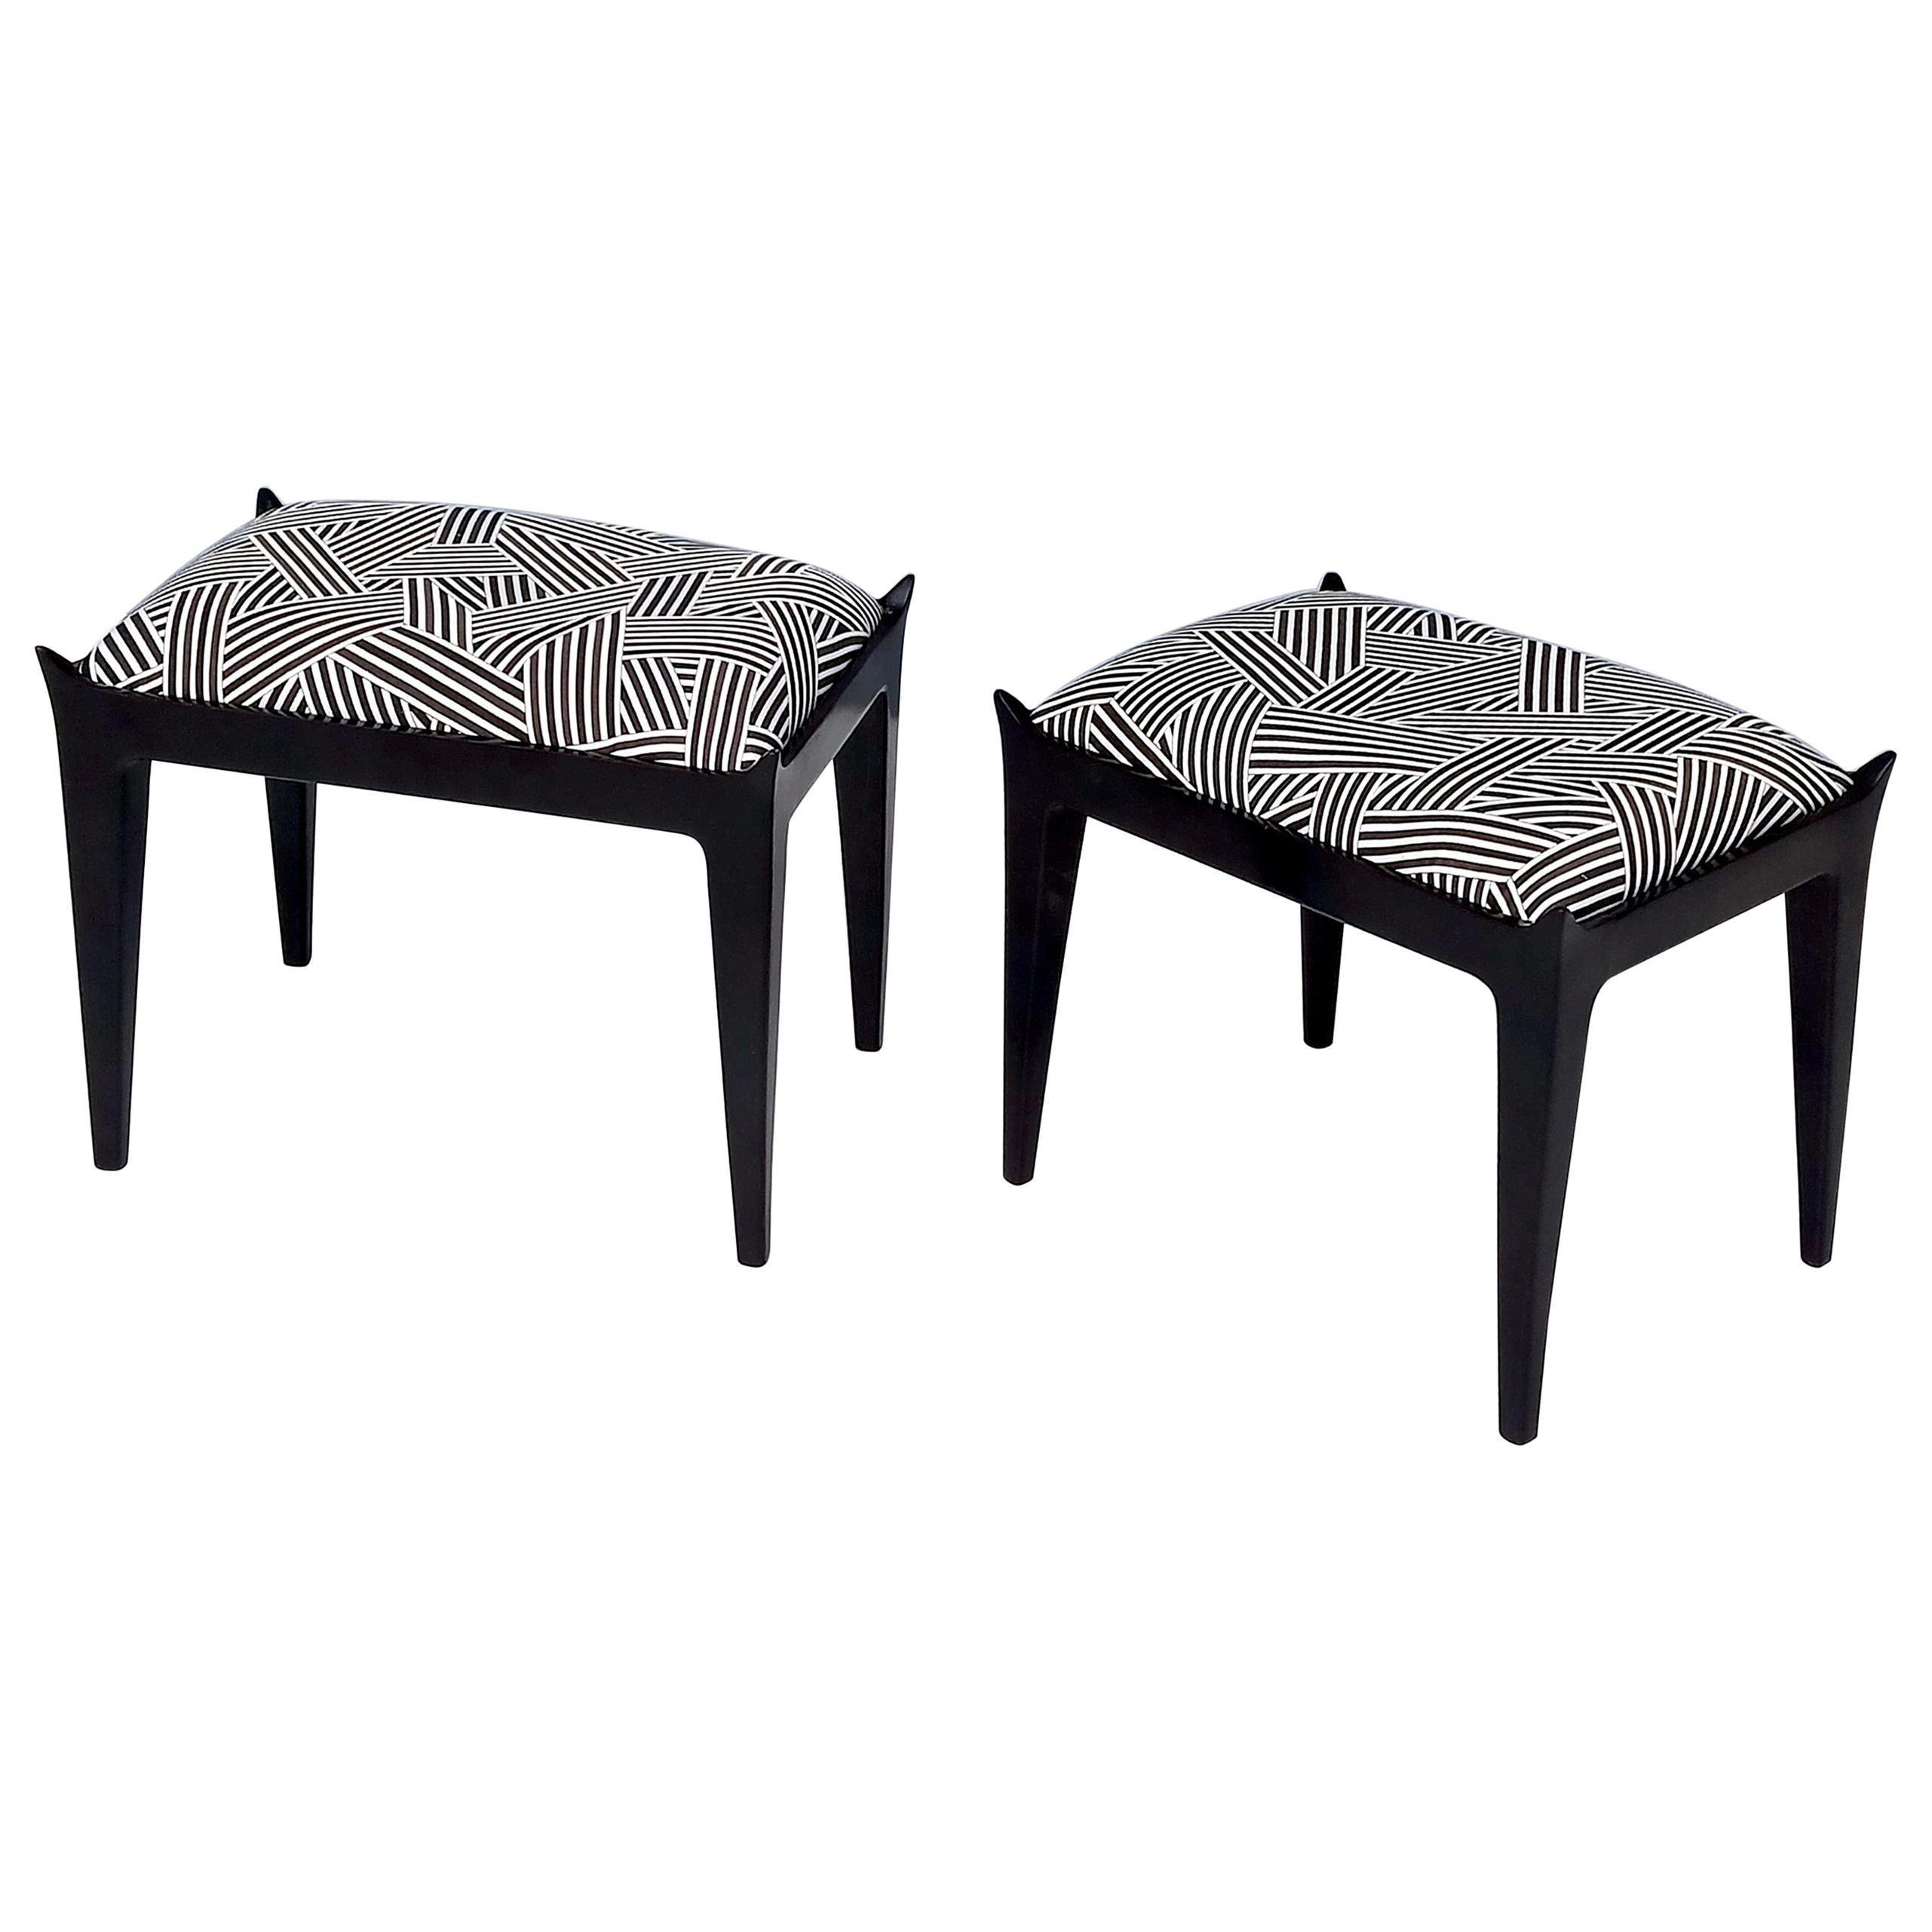 Pair of Vintage Poufs Upholstered in Black and White Fabric by Dedar For Sale